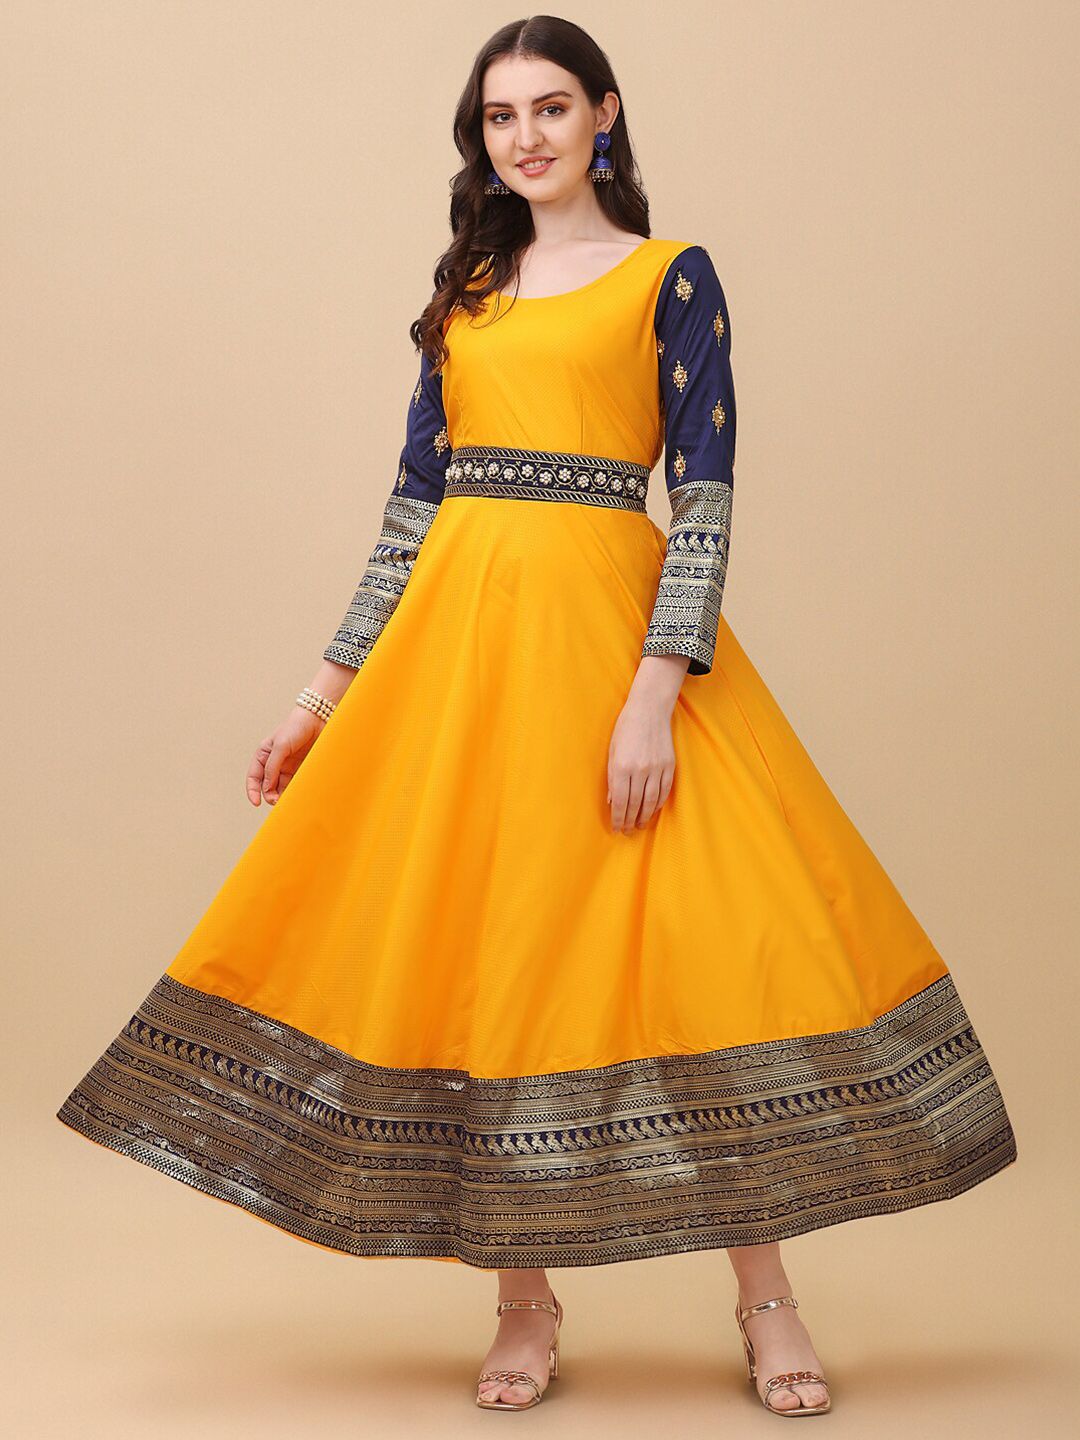 Vidraa Western Store Yellow Floral Embroidered Ethnic Maxi Dress Price in India